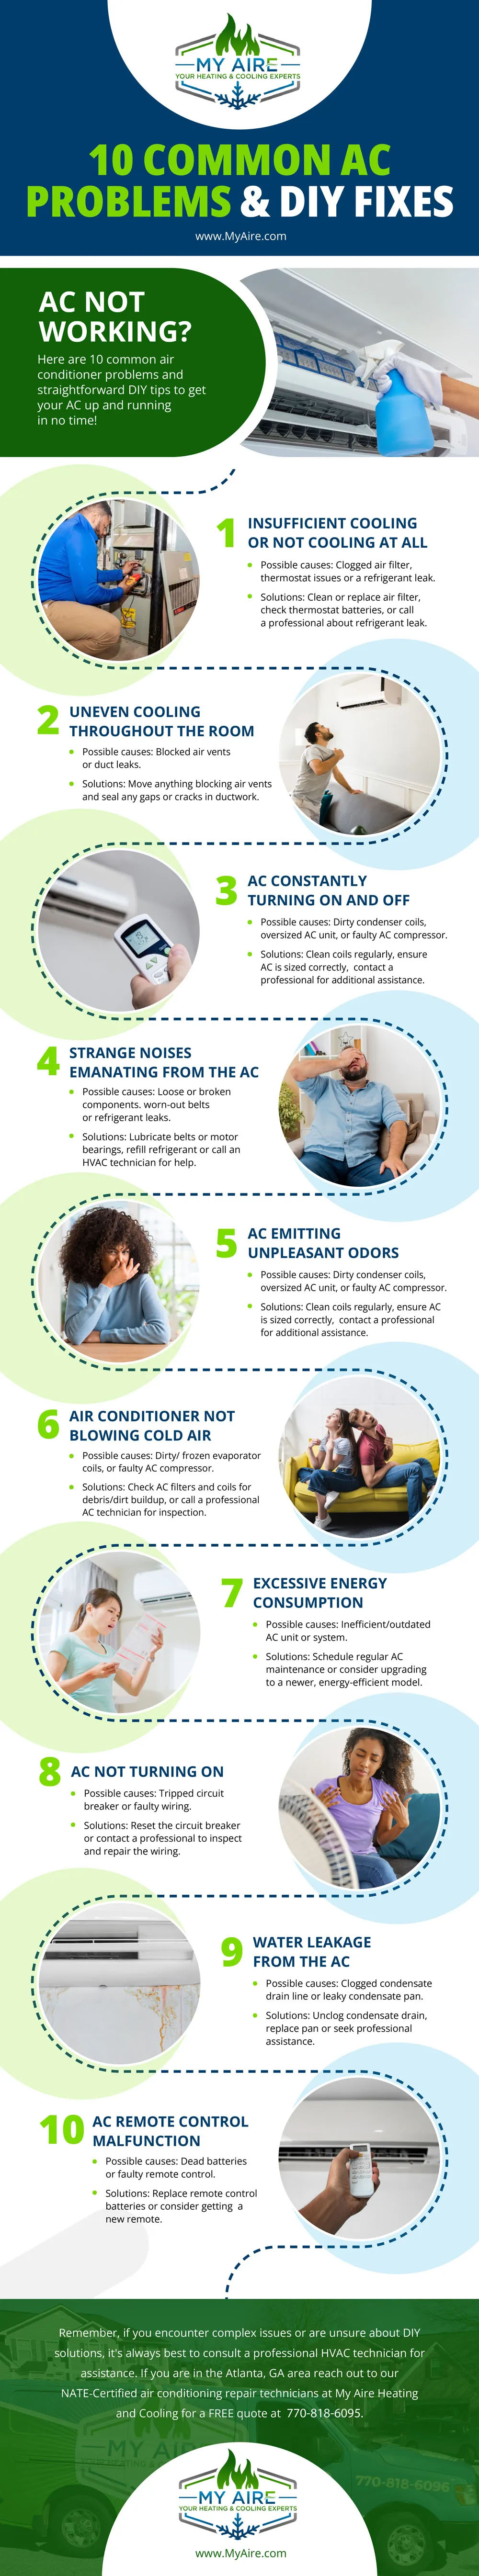 Top 10 Common AC Problems and DIY Tips